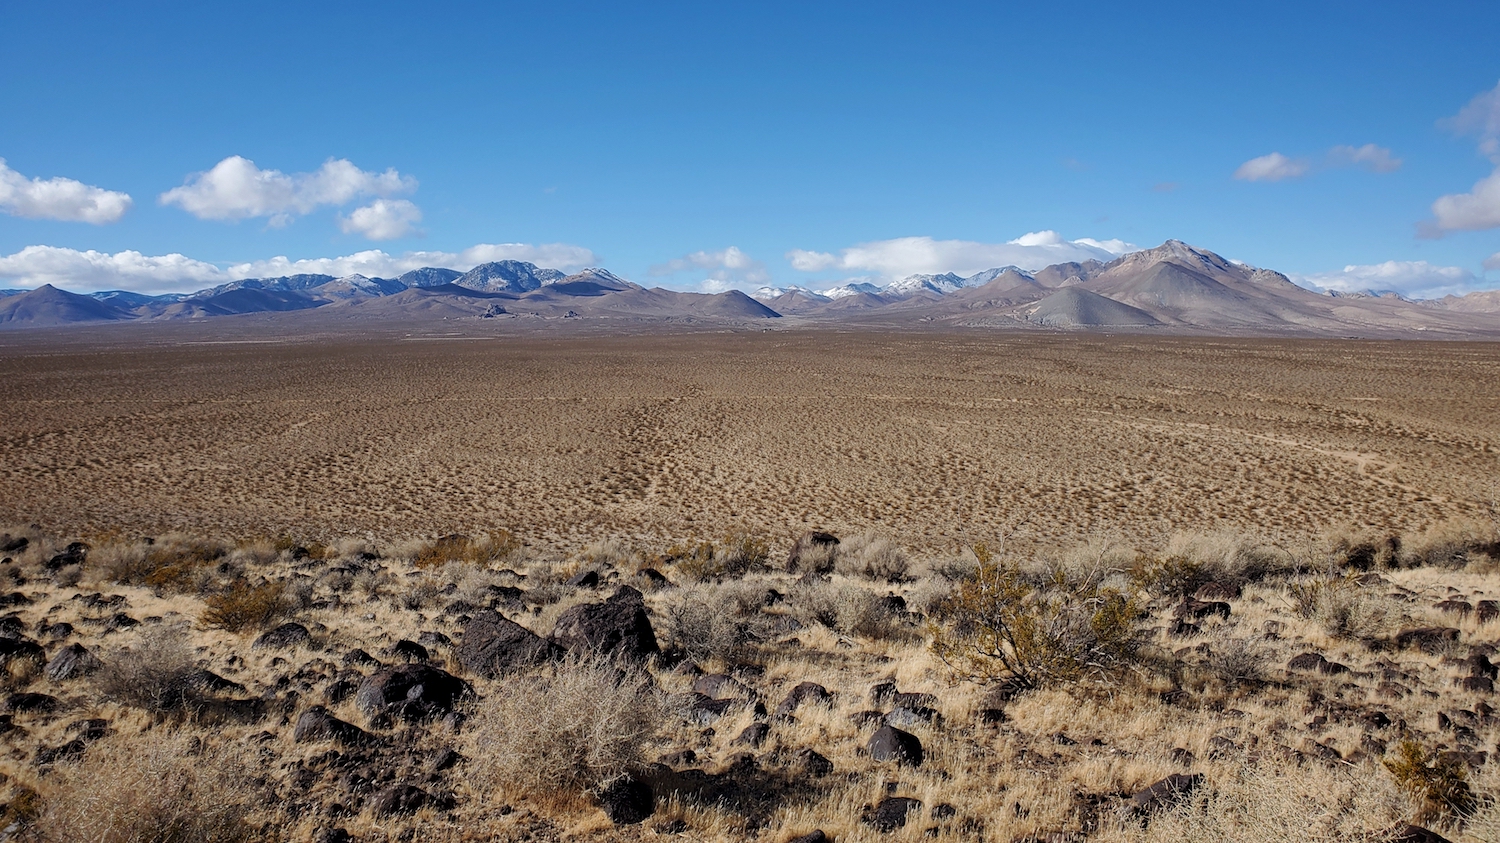 A section of the desert that looks out over snowy peaks